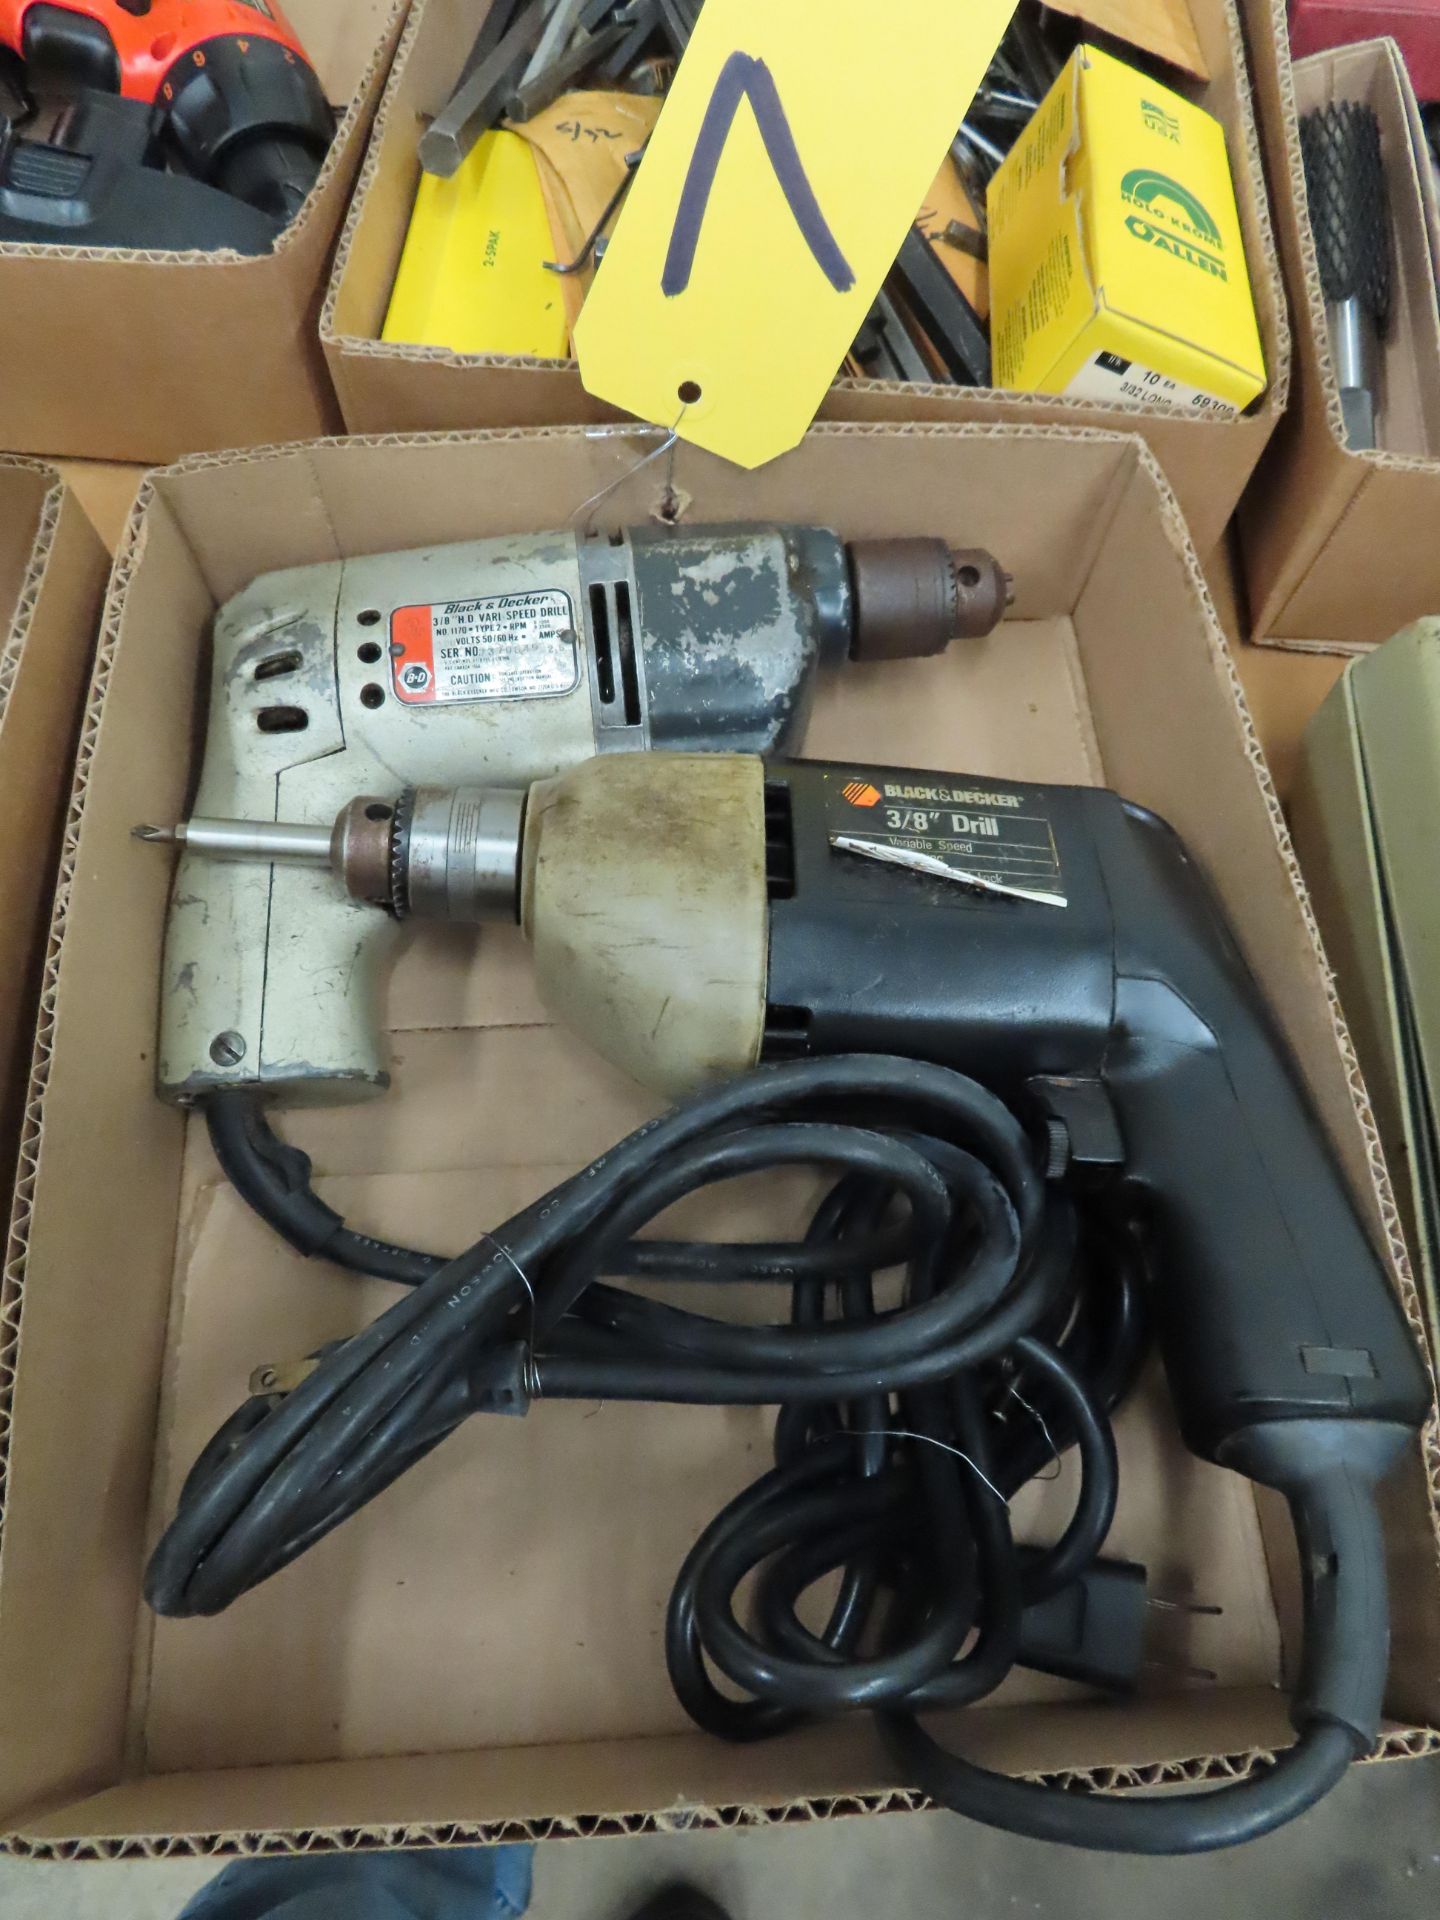 (2) BLACK AND DECKER 3/8" ELECTRIC DRILLS